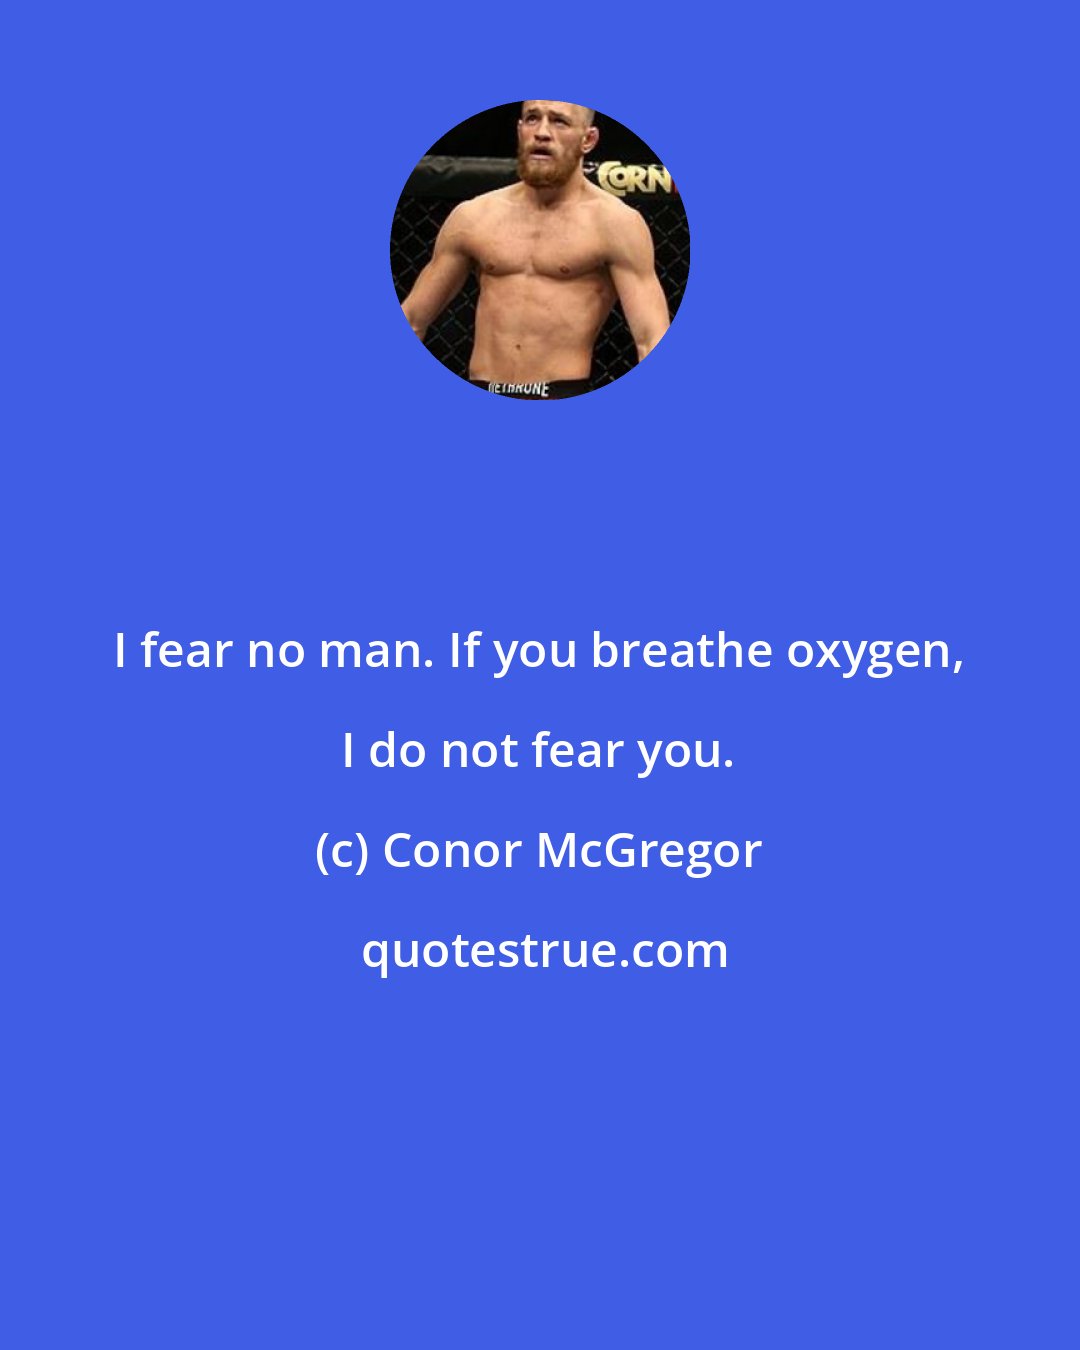 Conor McGregor: I fear no man. If you breathe oxygen, I do not fear you.